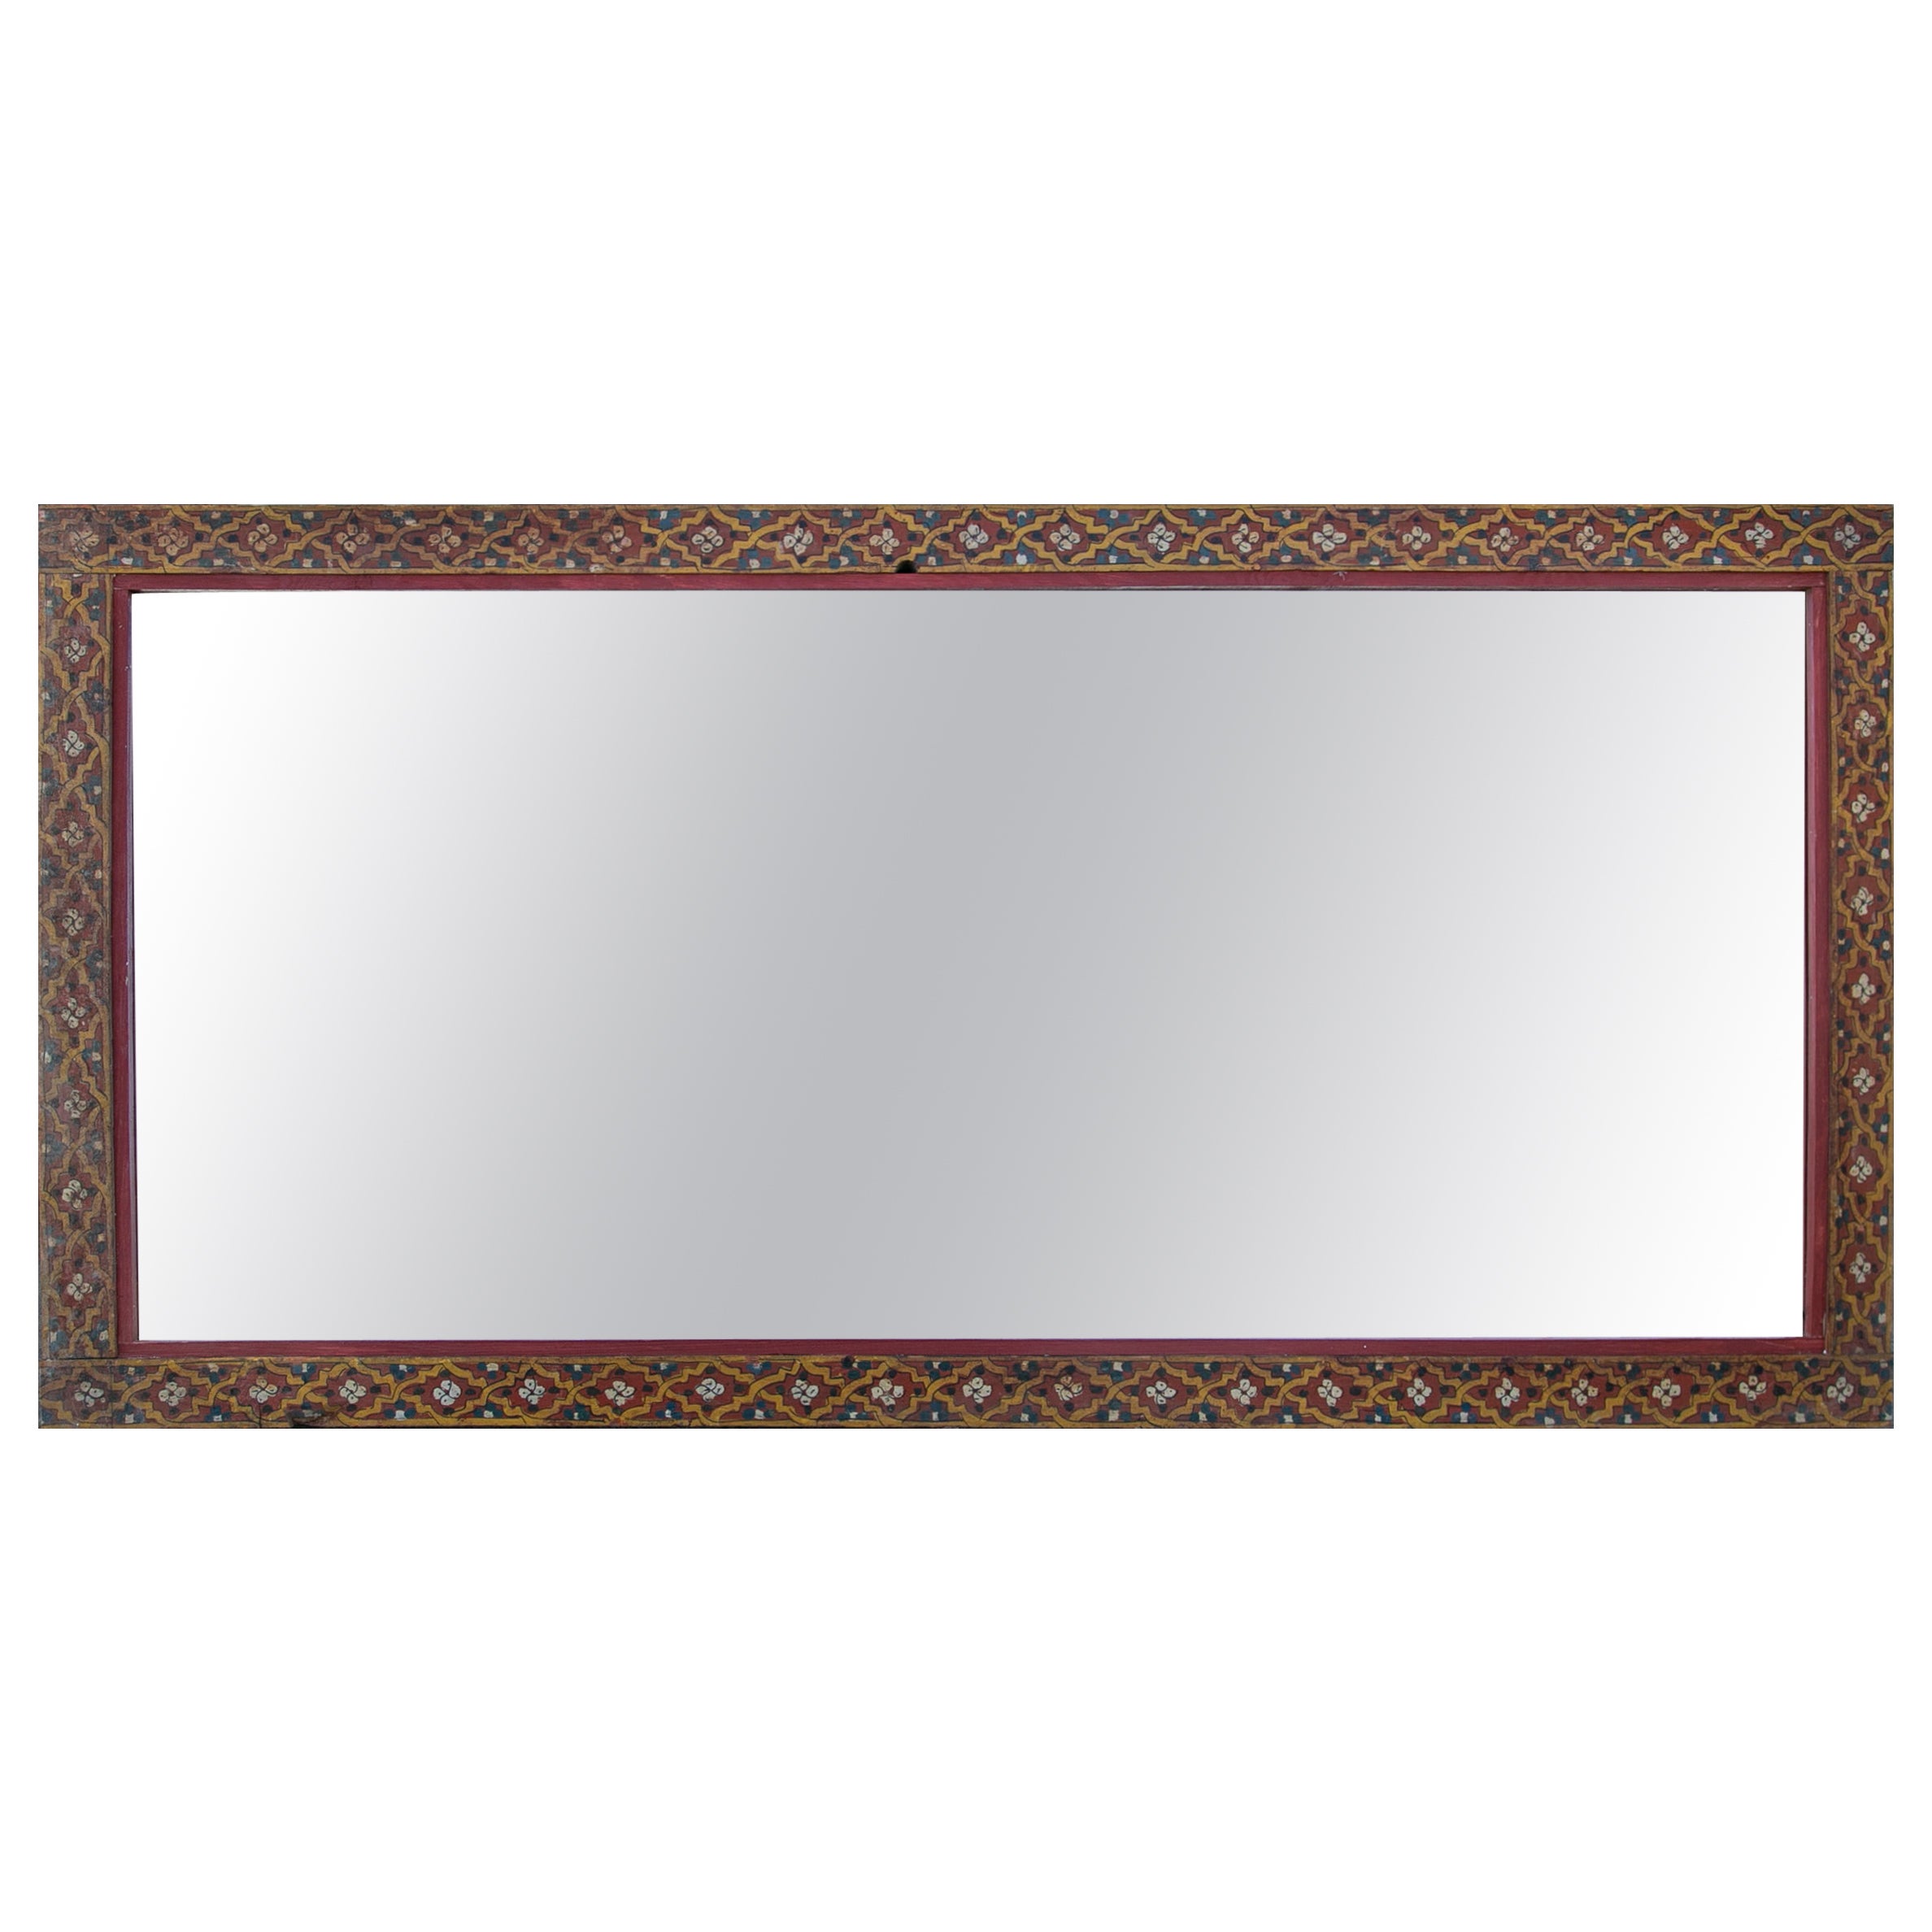 19th Century, Wall Mirror with Wooden Frame Made of Polychrome Panels For Sale